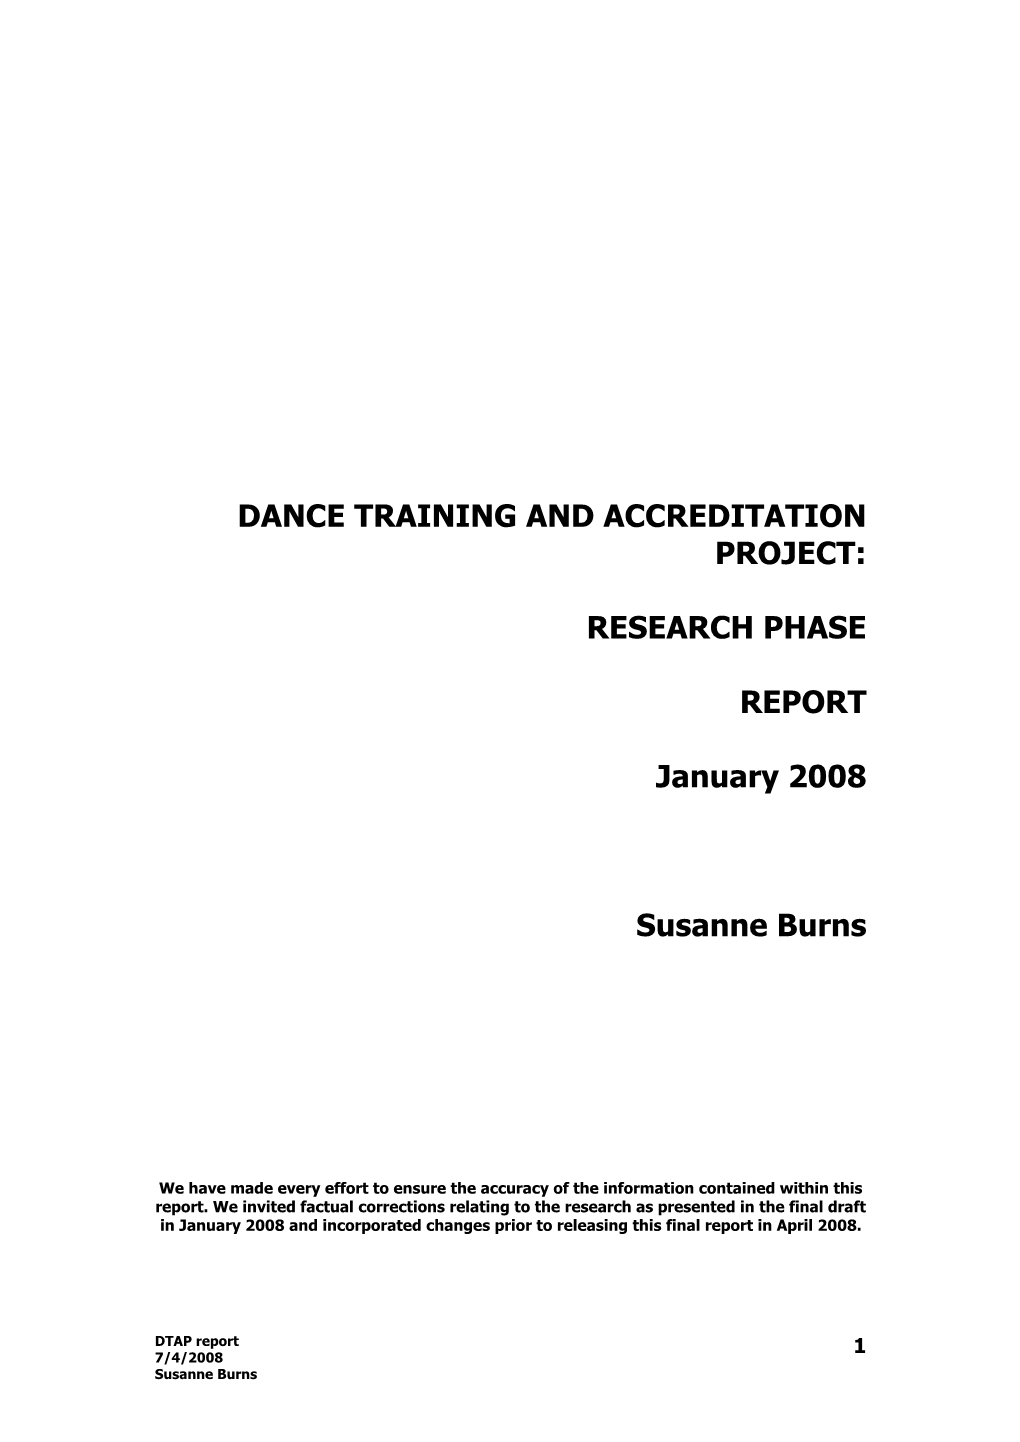 Dance Training and Accreditation Project